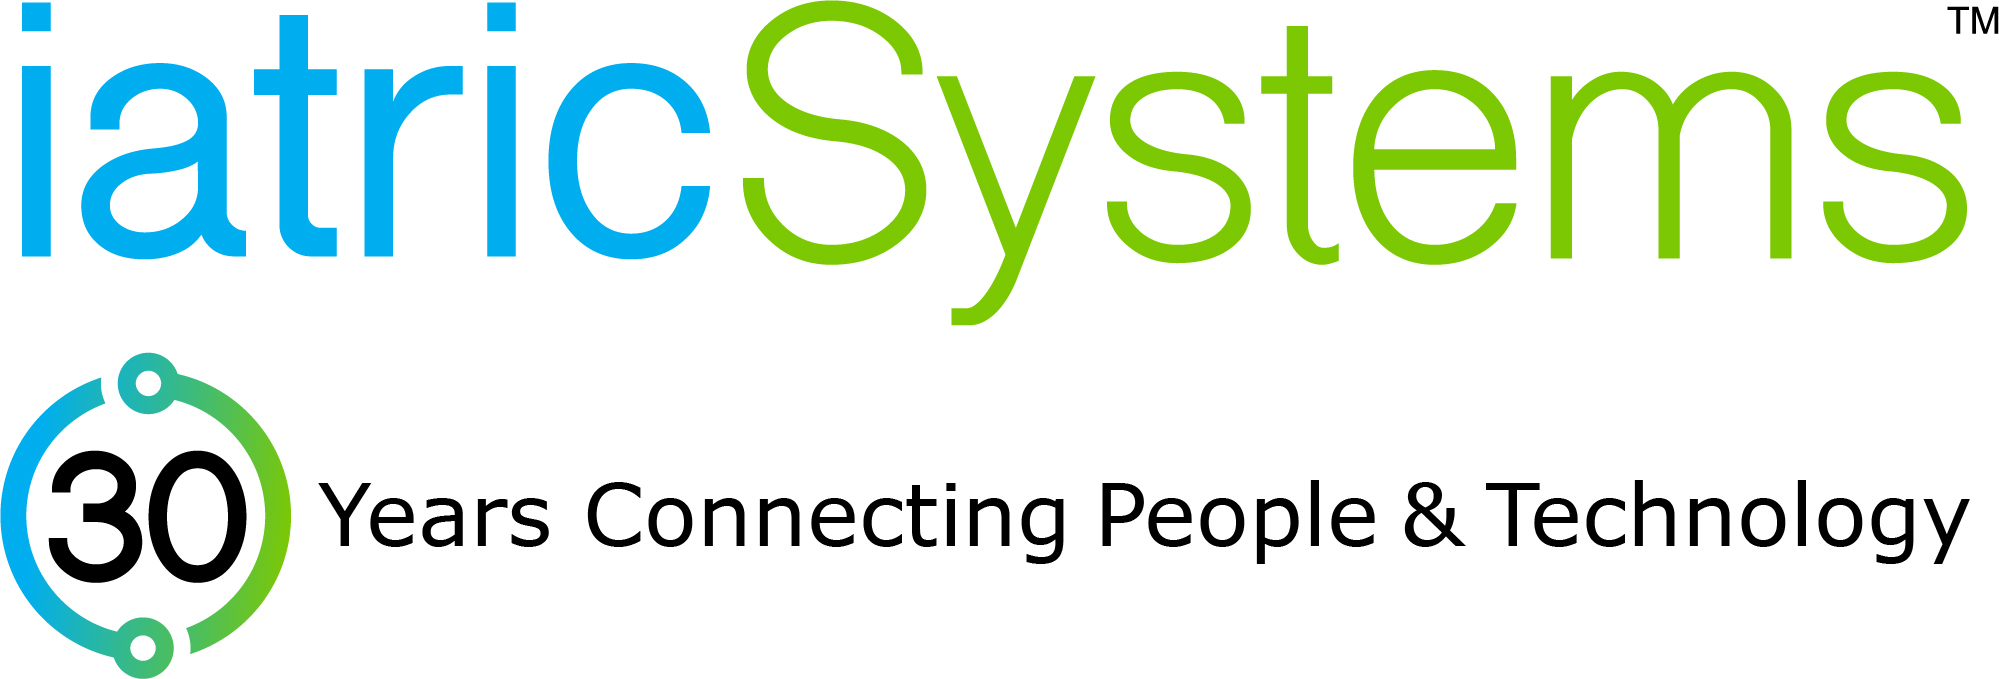 Iatric Systems: Integration is Everything